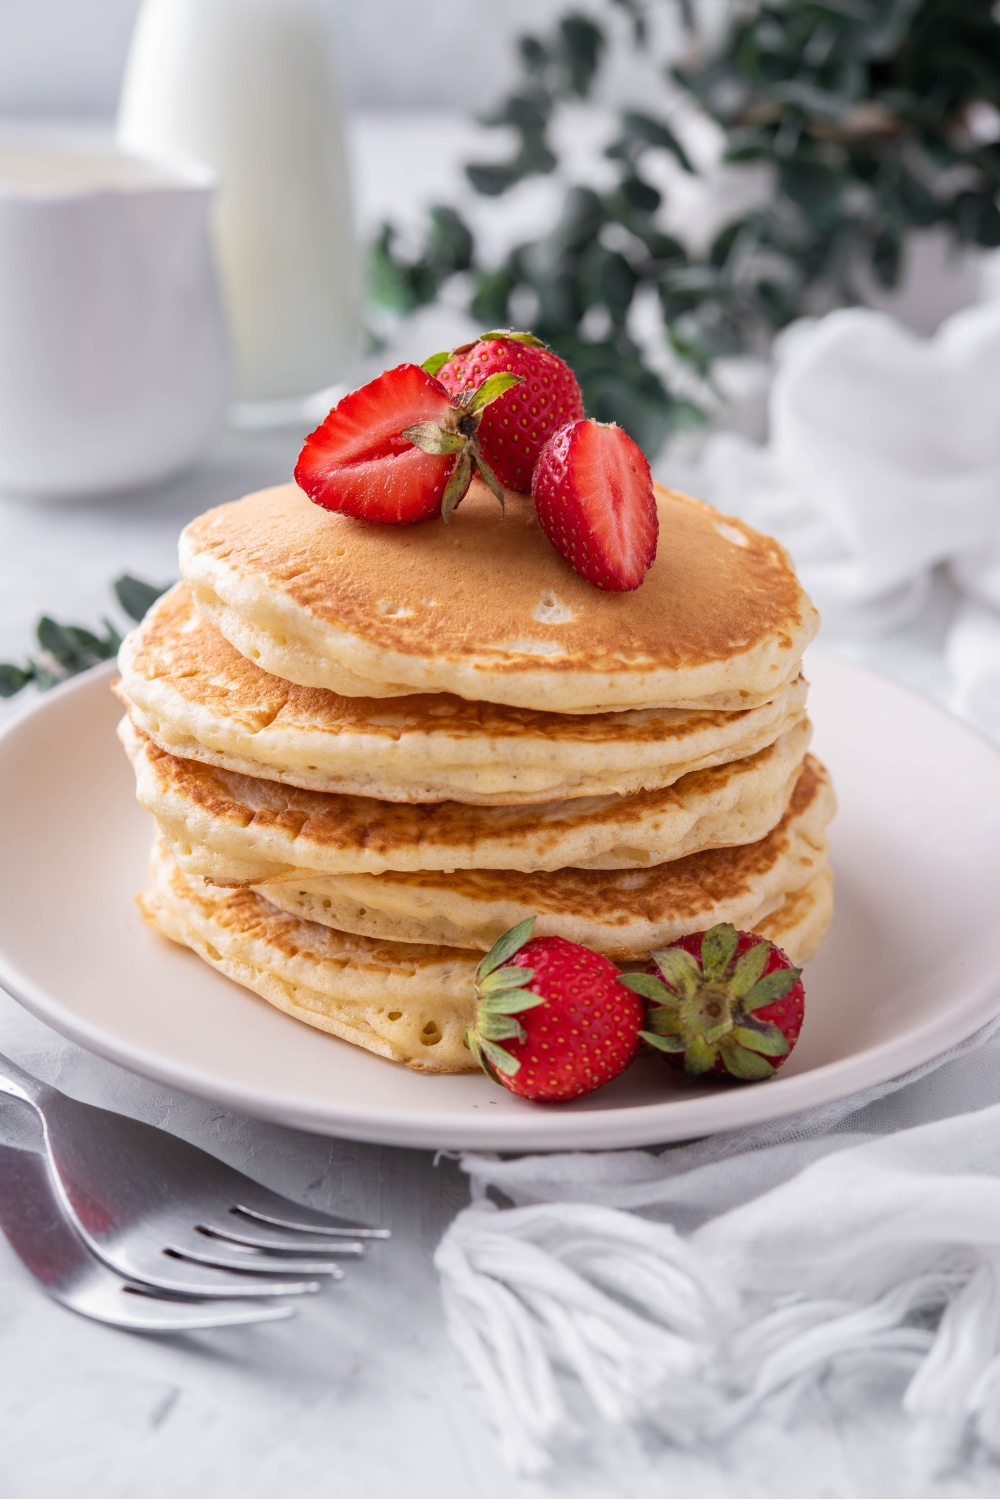 A stack of pancakes on a plate with sliced strawberries.